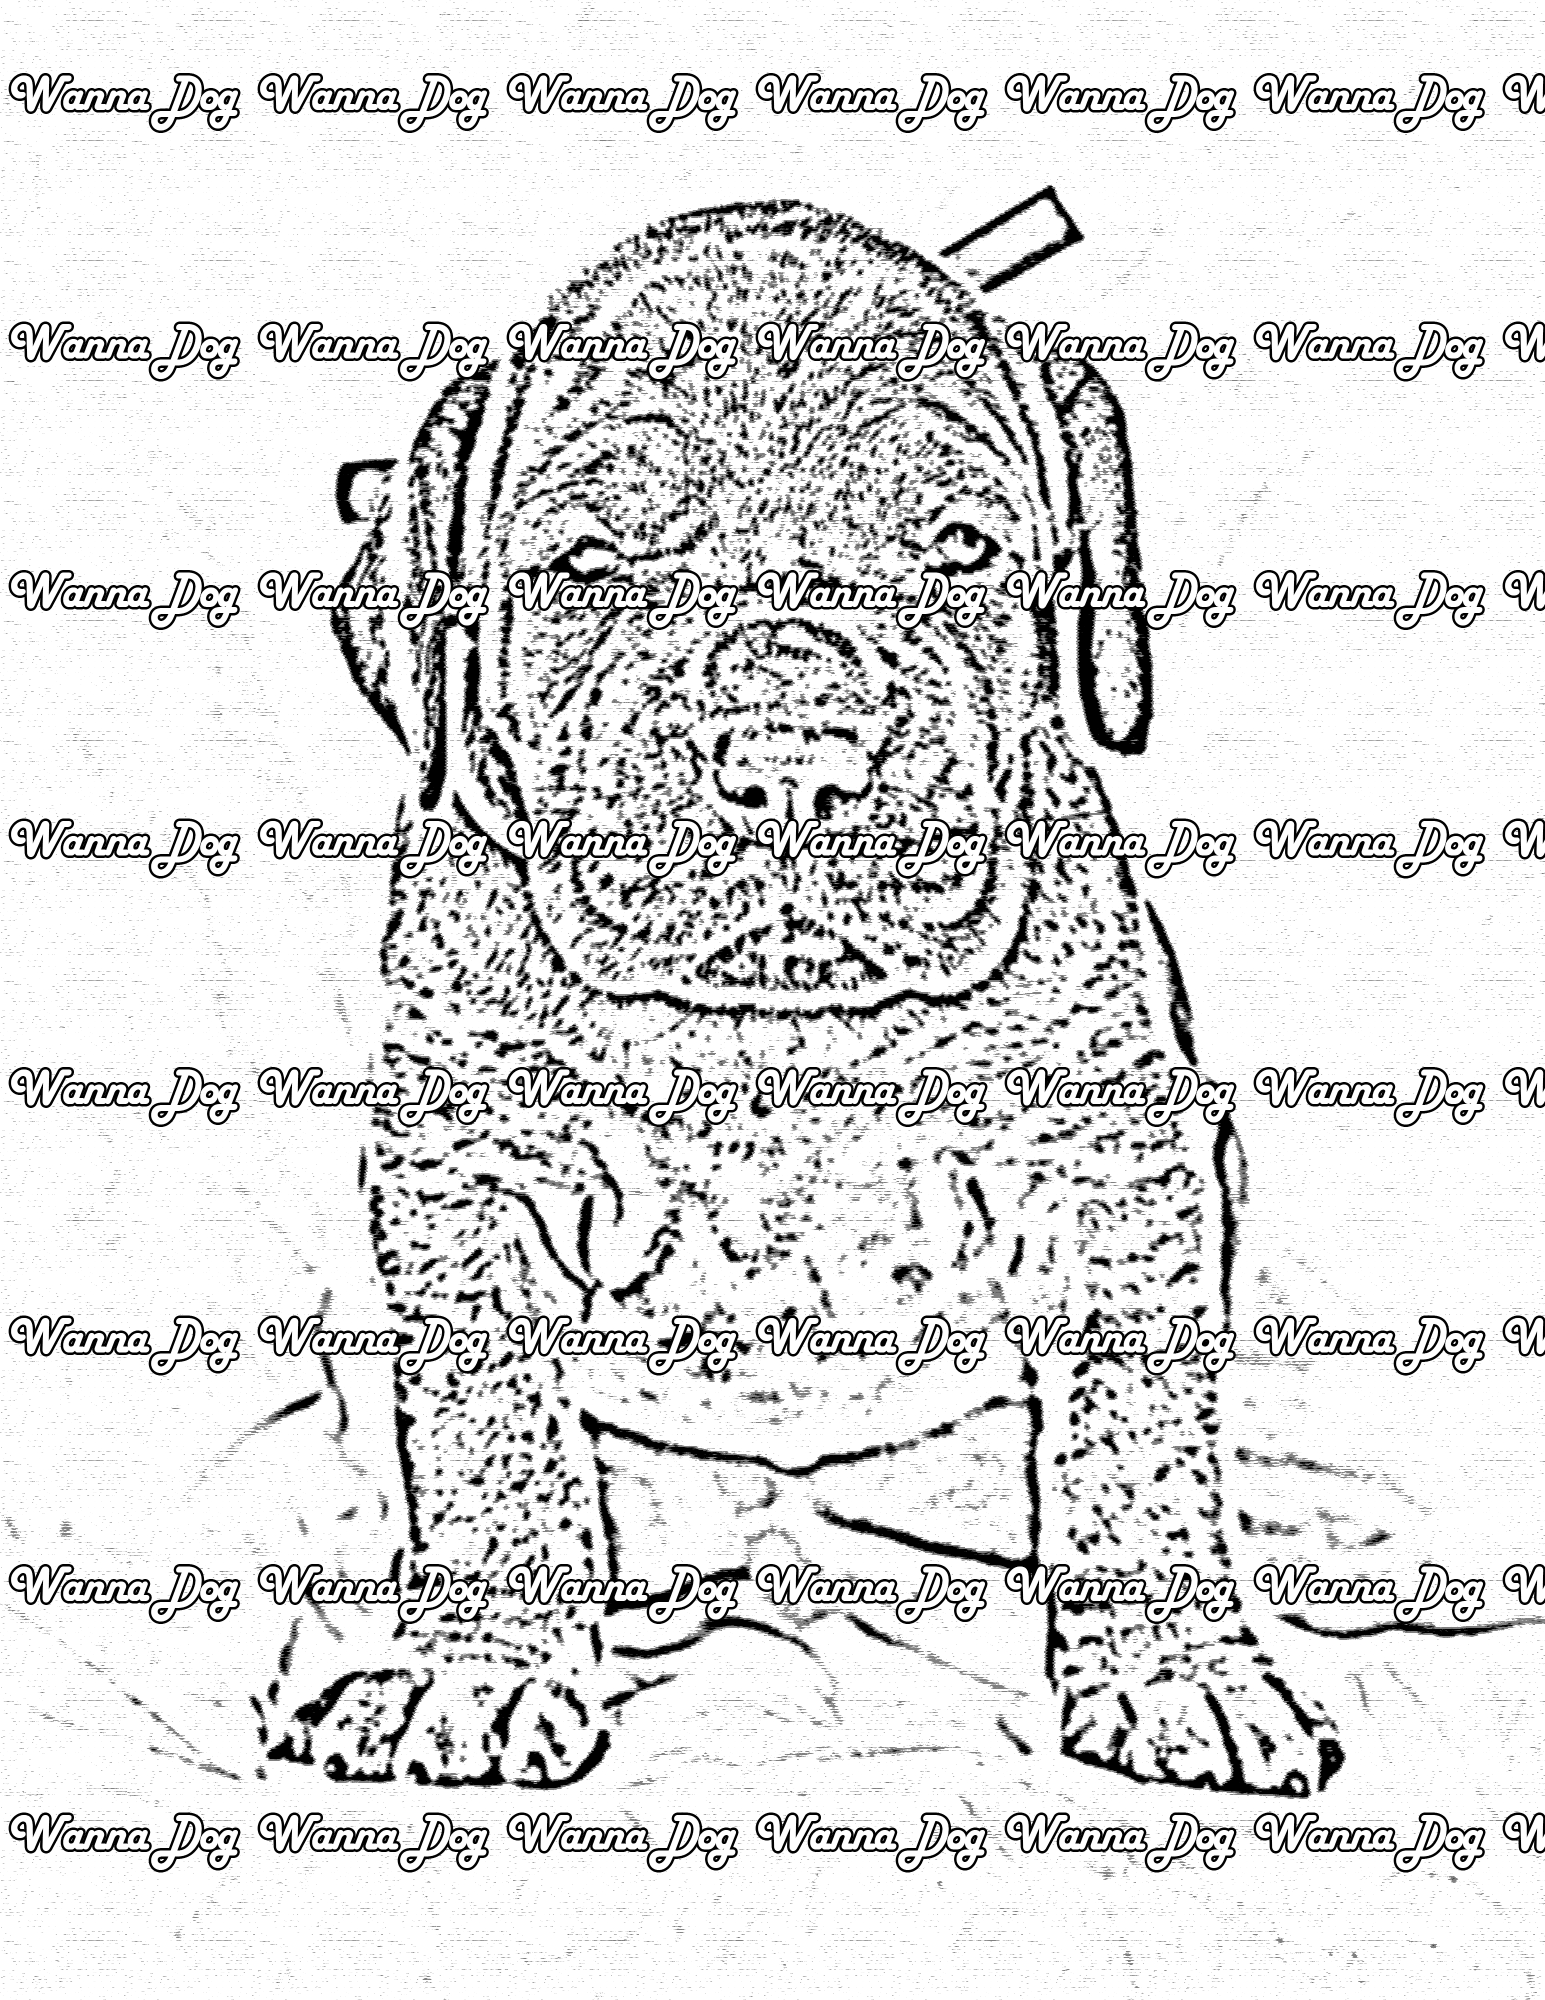 Great Dane Coloring Page of a Great Dane puppy posing